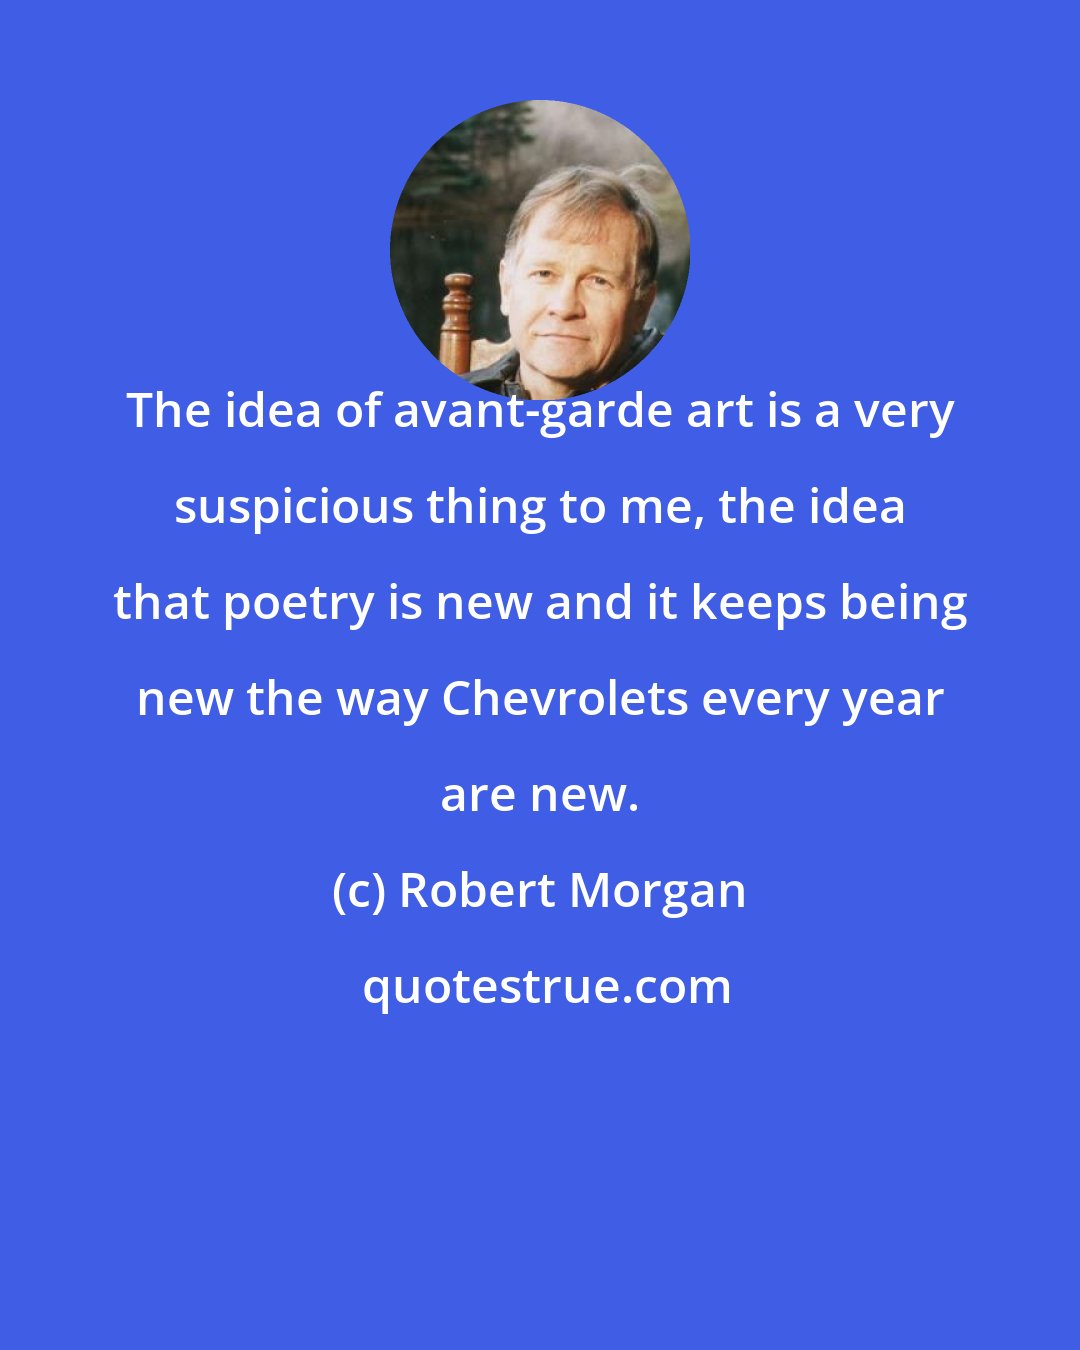 Robert Morgan: The idea of avant-garde art is a very suspicious thing to me, the idea that poetry is new and it keeps being new the way Chevrolets every year are new.